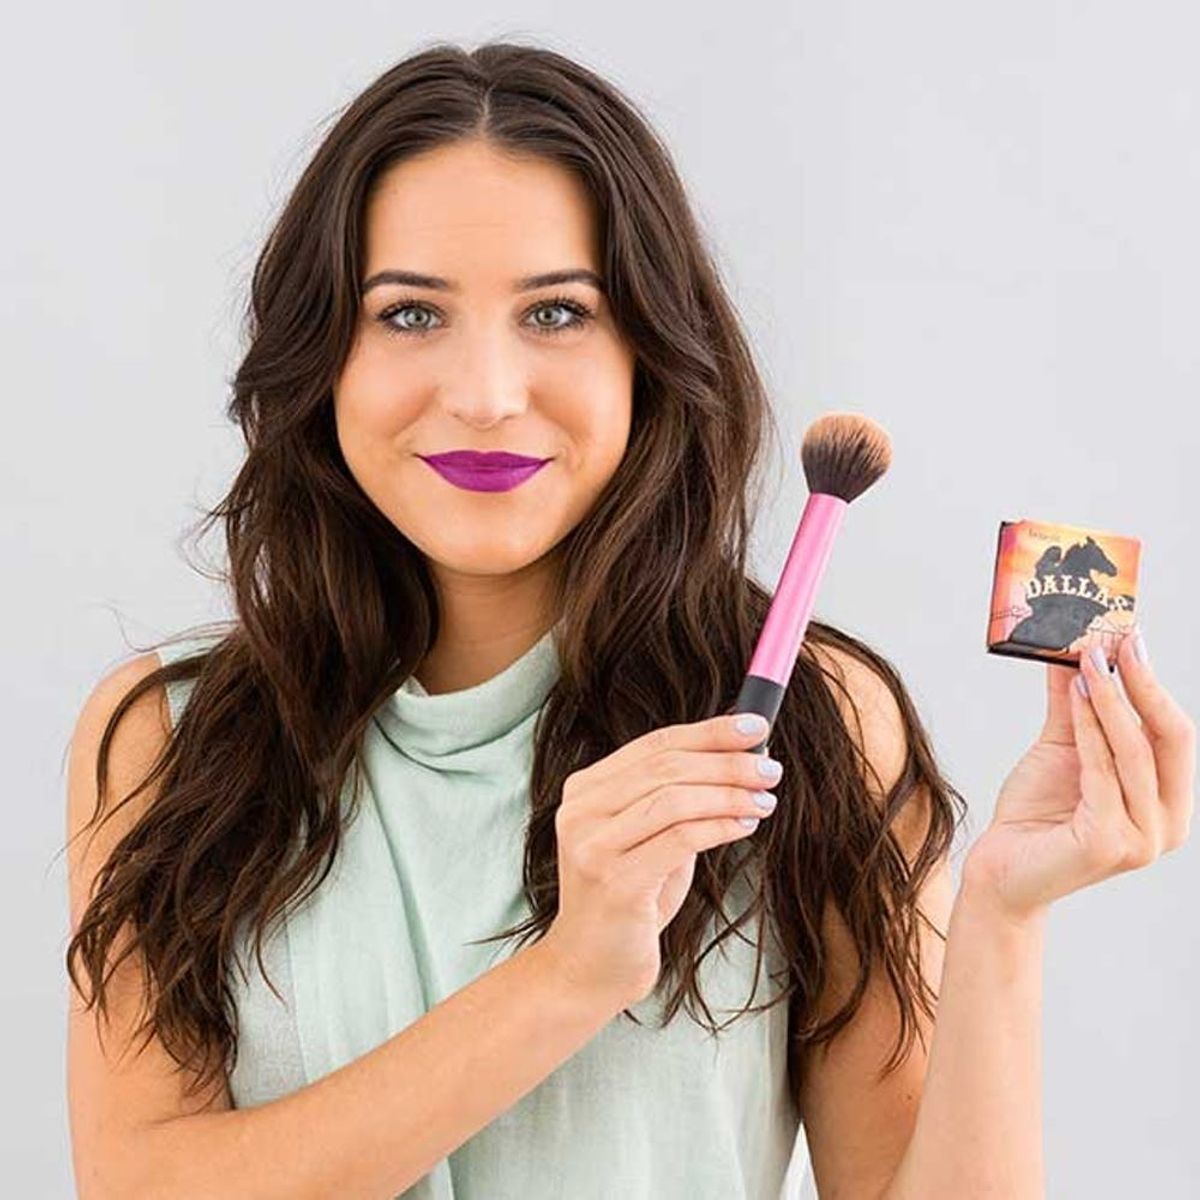 5 Editor-Approved Blushes That Look Good on Everyone